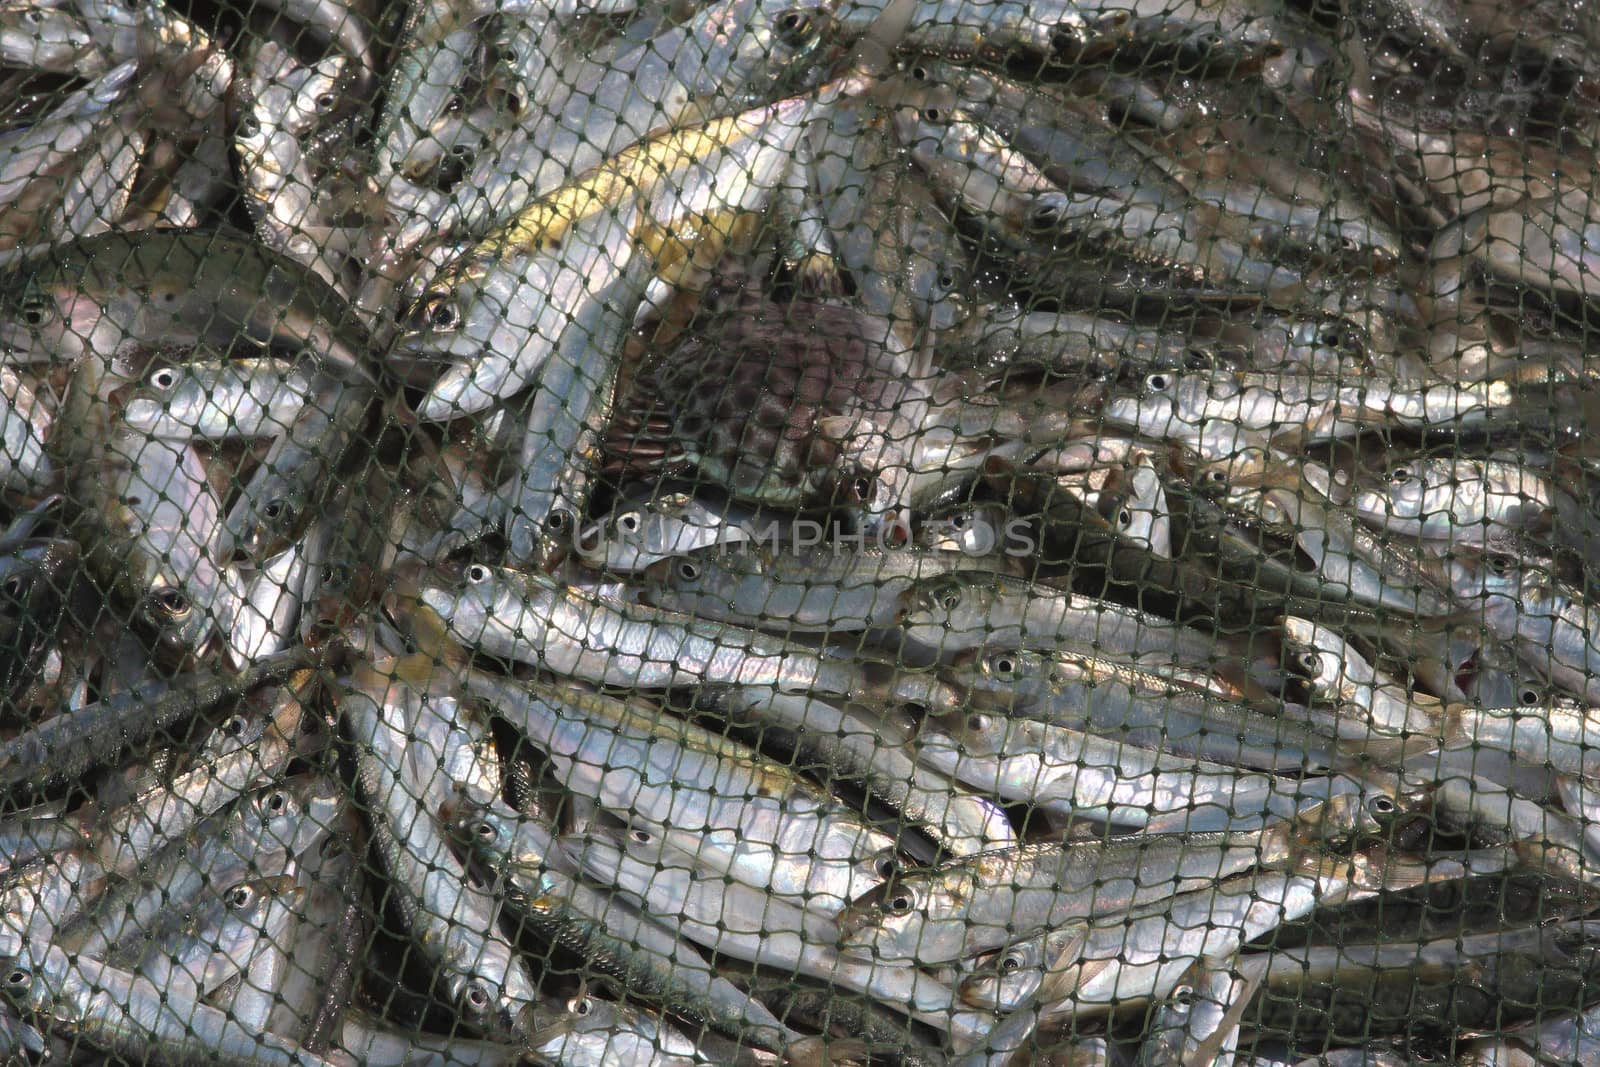 Fishing - live fish caught in the net